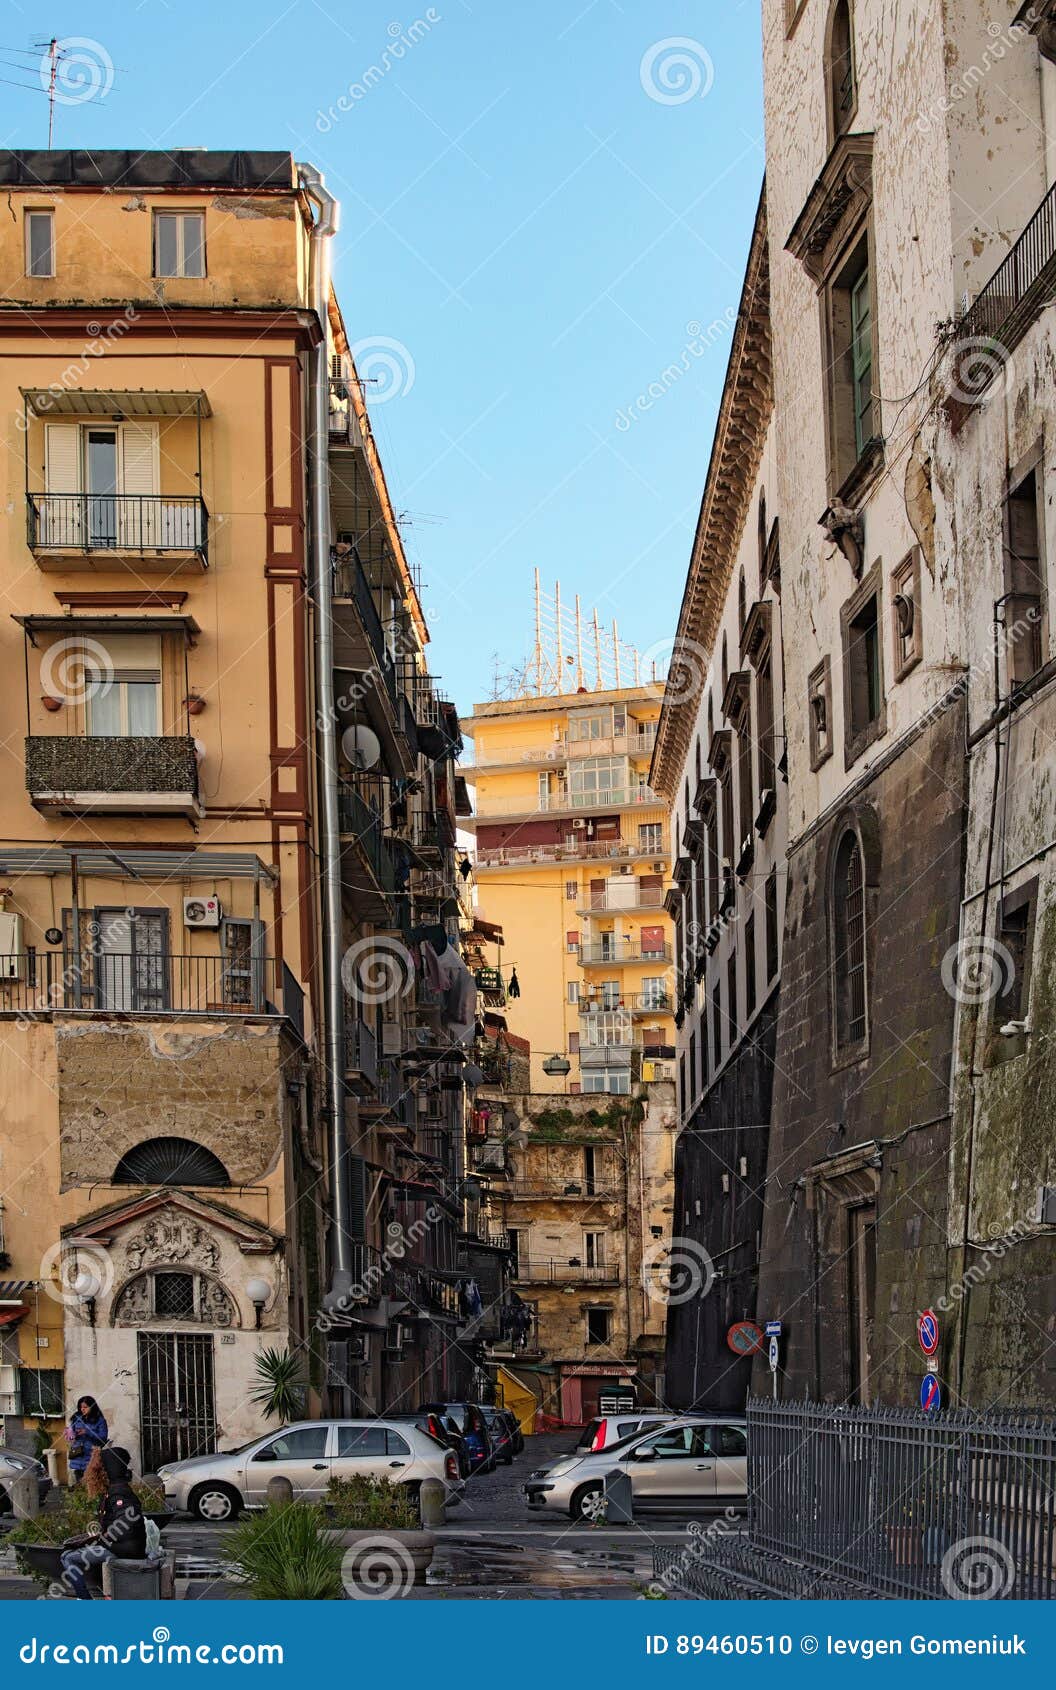 NAPLES, ITALY, January 05, 2017: an Ordinary Street View with Apartment ...